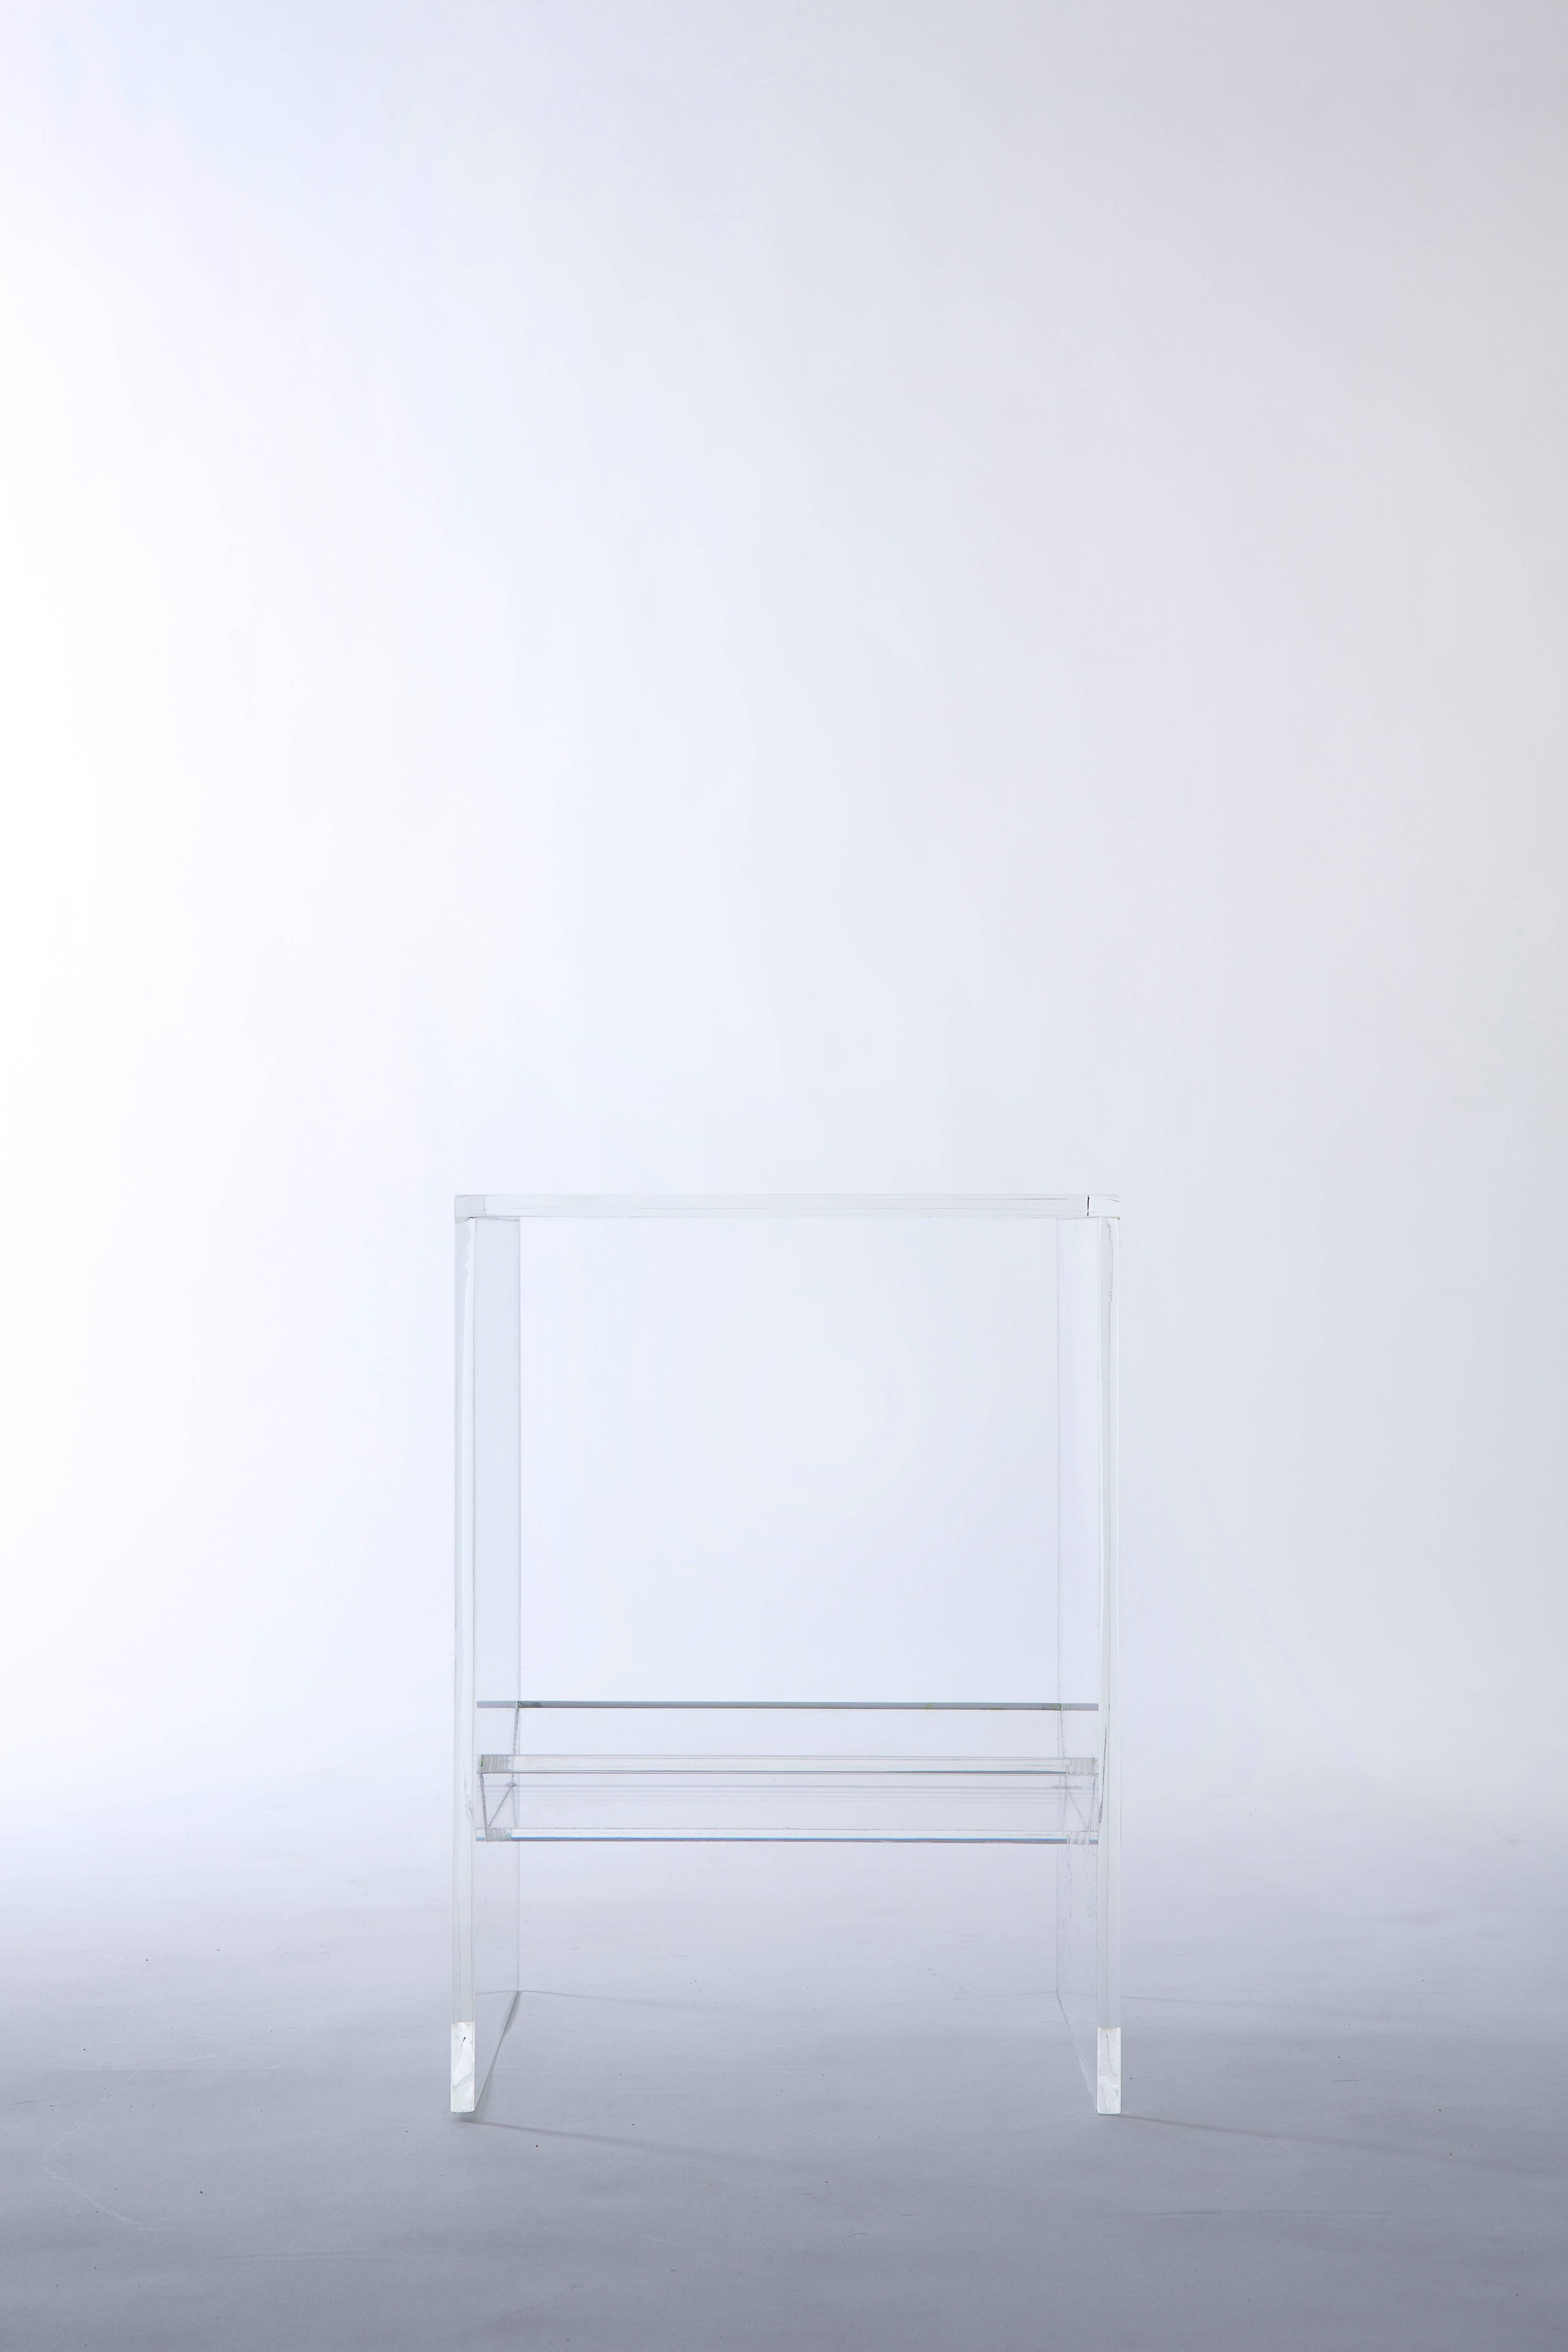 Like the other members of our 'Bond Series', this completely transparent acrylic side/end table is defined by the trough nestled underneath its surface. The trough enables you to curate your own sub-seat terrarium, or to display your own accents,